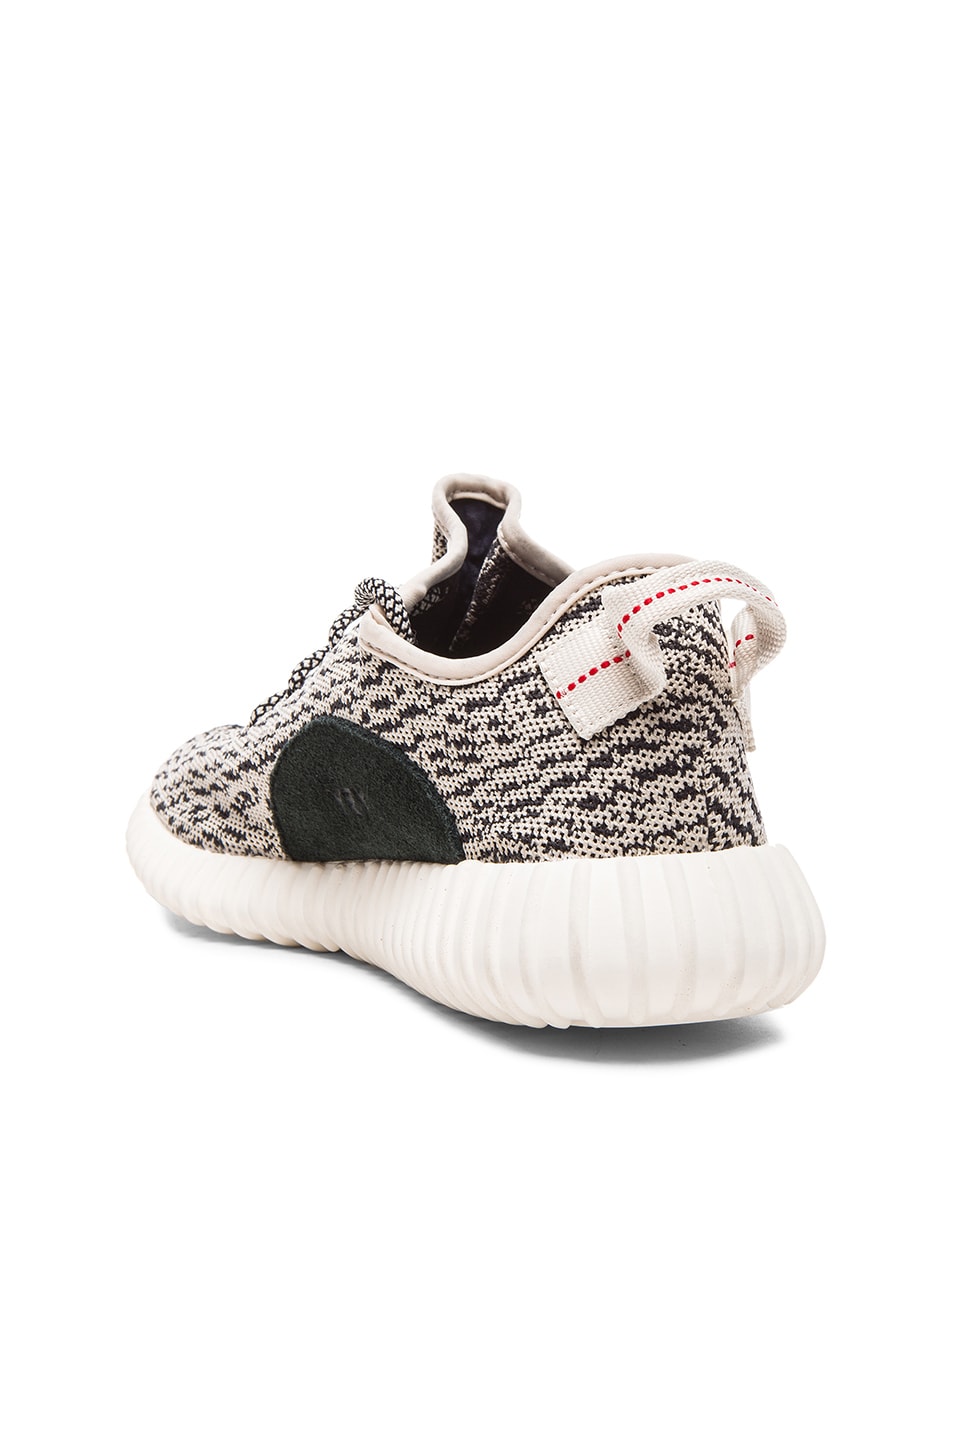 adidas Yeezy Boost 350 Infant Turtle Dove Release Date 